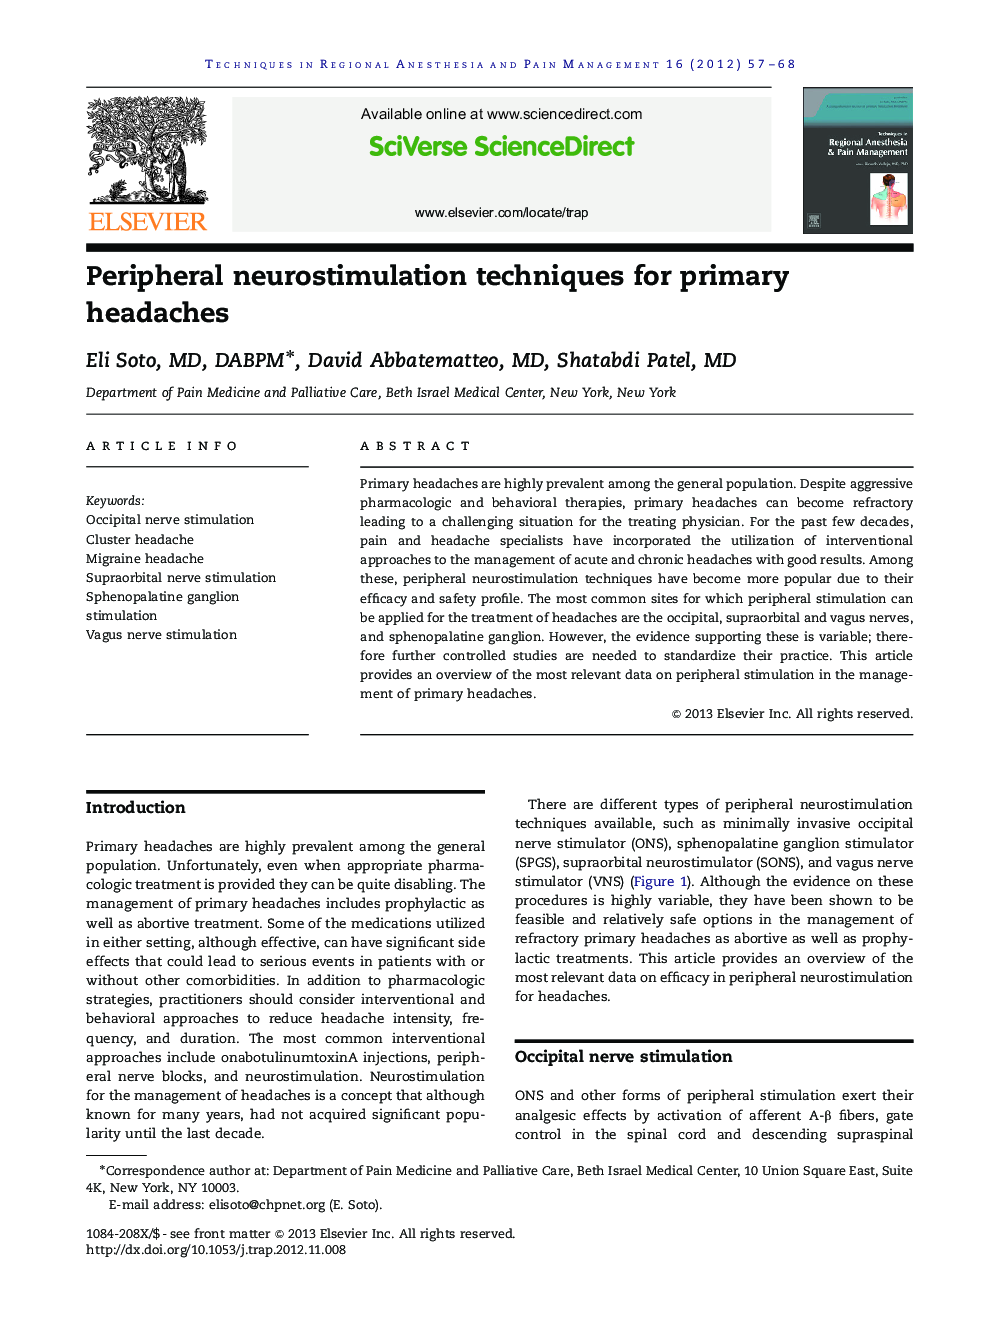 Peripheral neurostimulation techniques for primary headaches